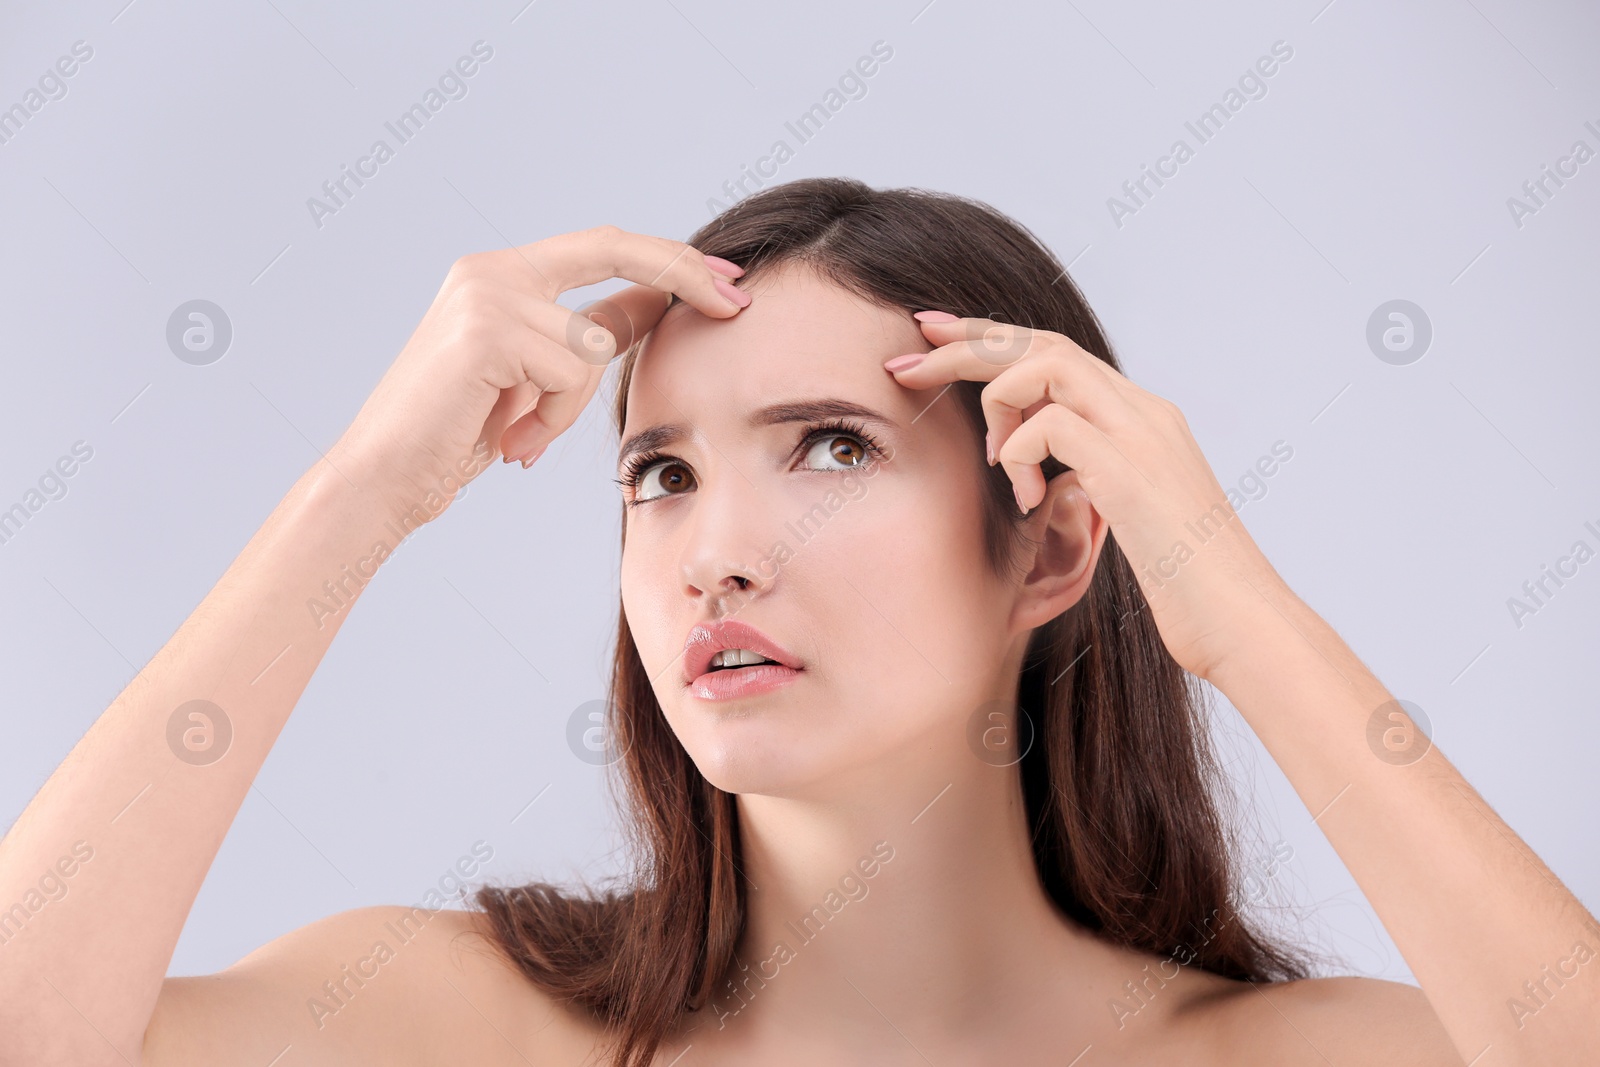 Photo of Teenage girl with acne problem against grey background